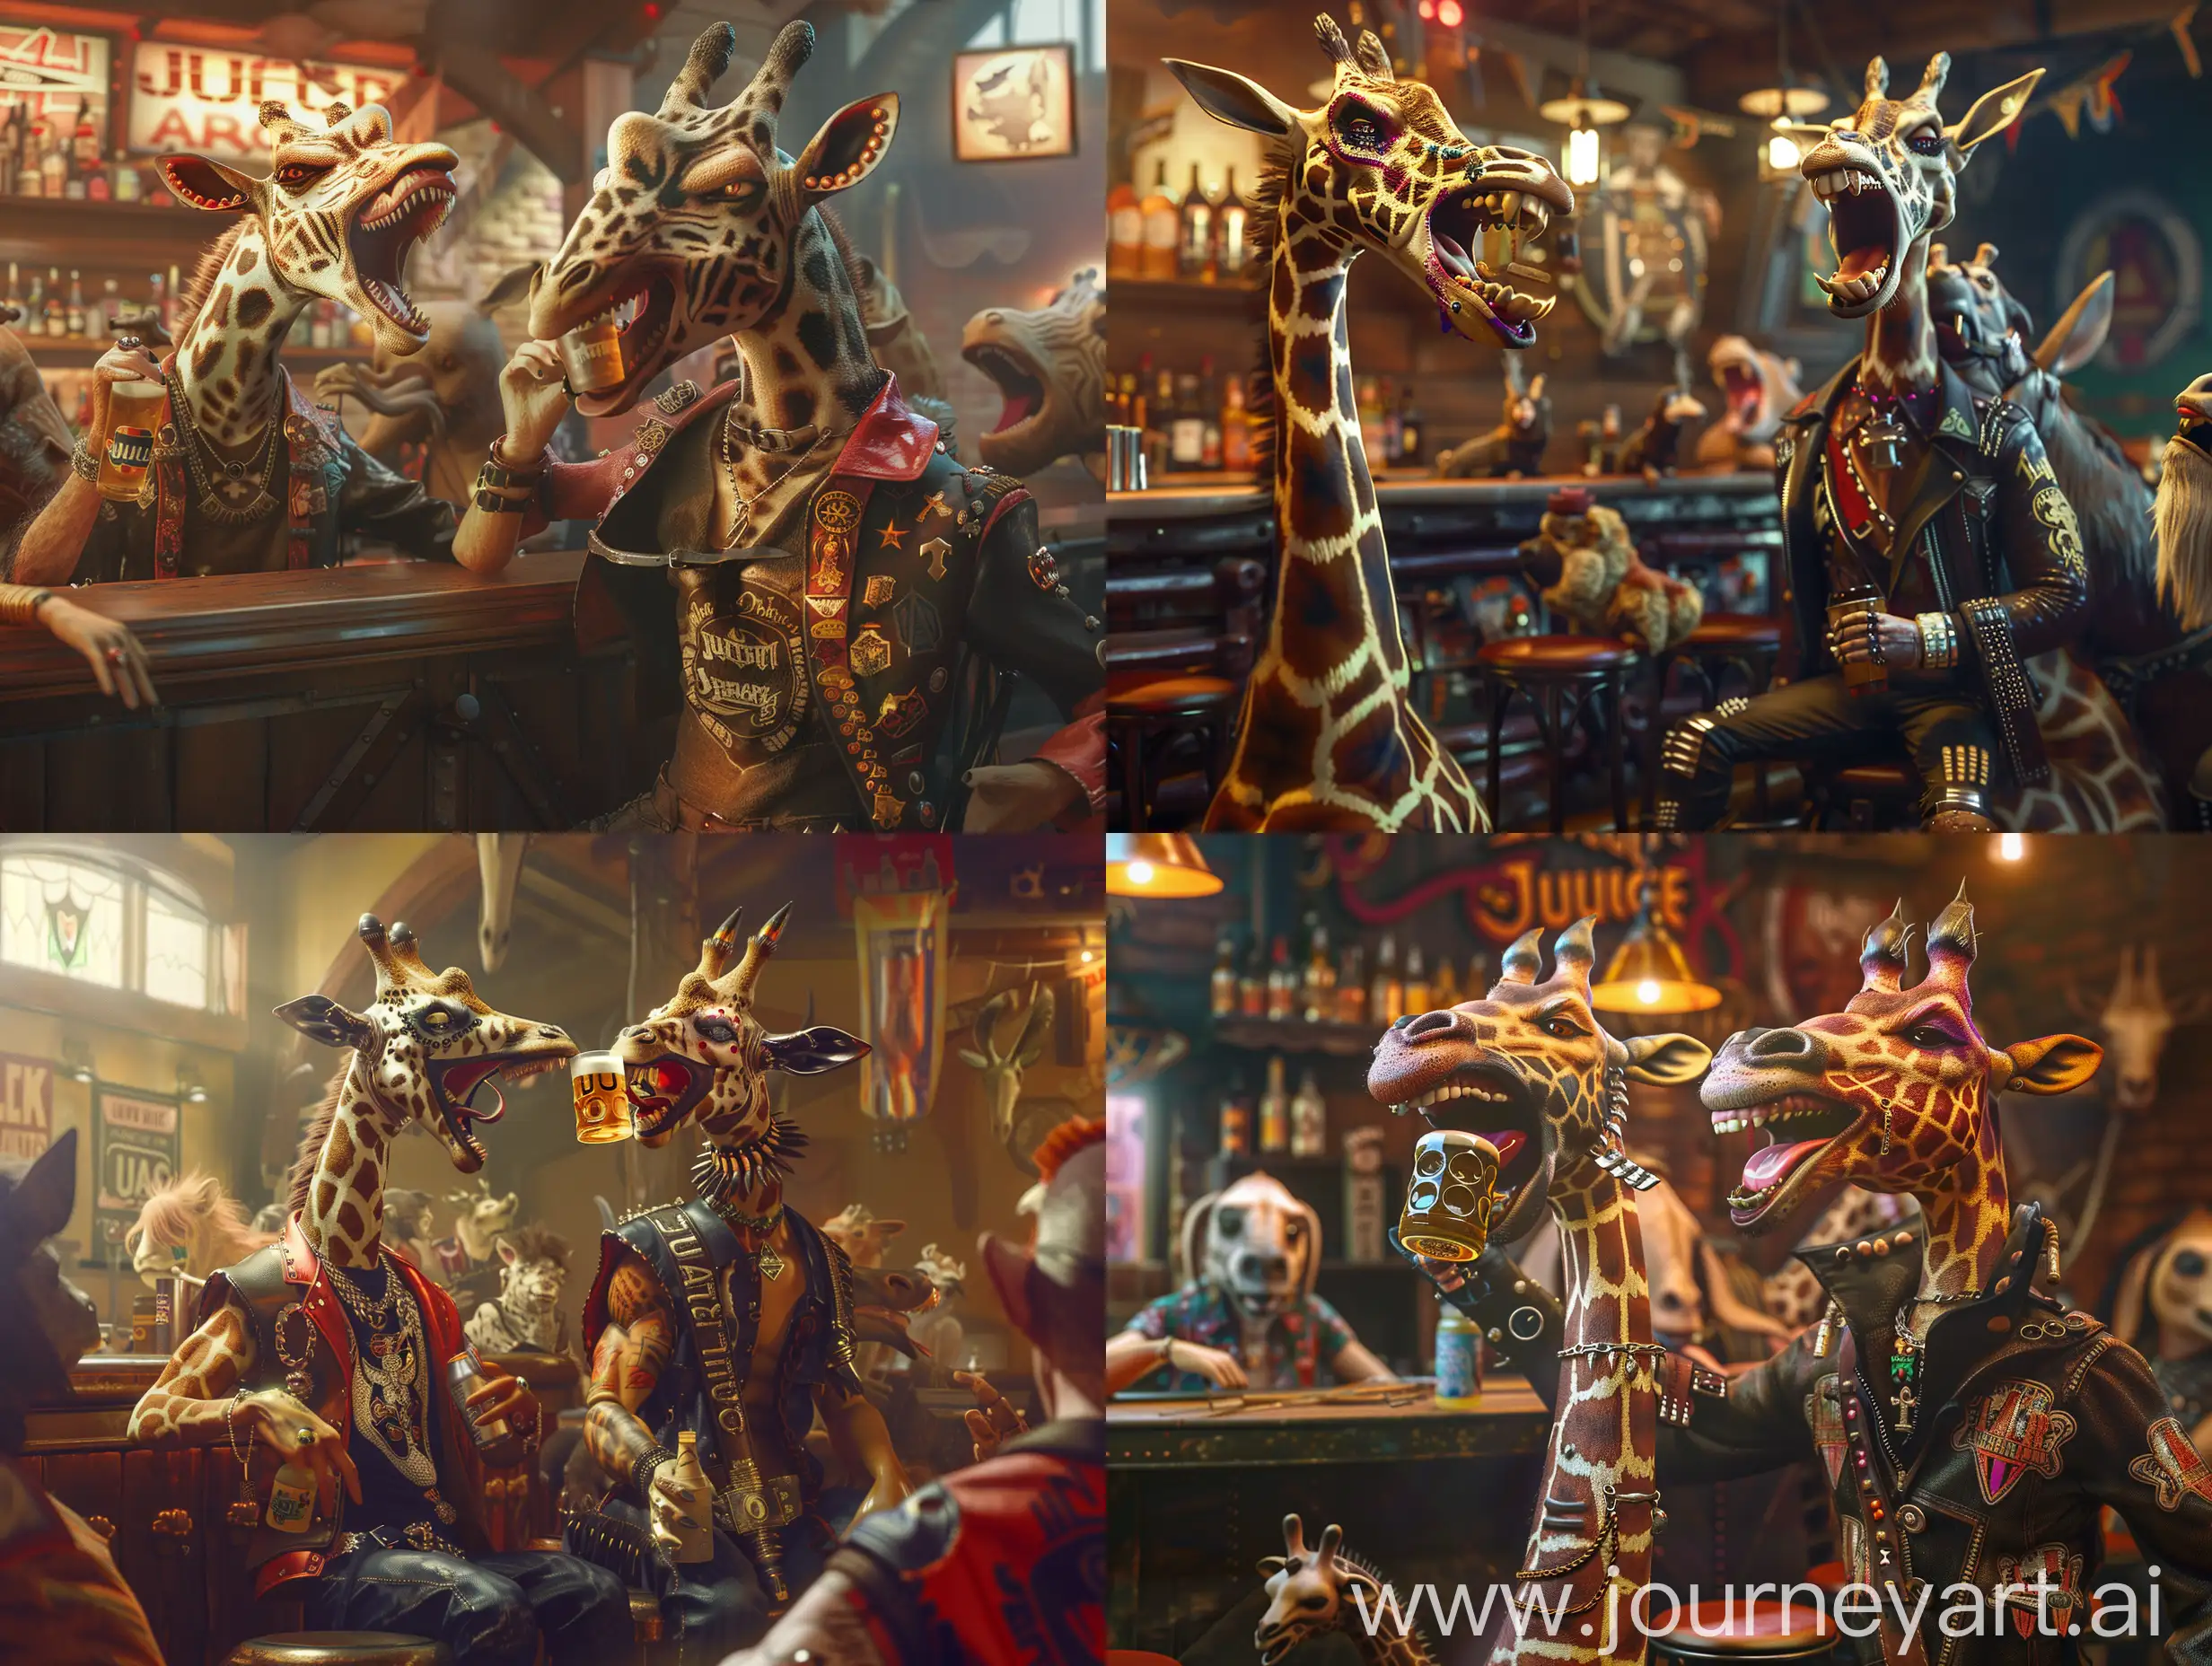 create a photorealistic CGI style image. 2 characters. 2 anthropomorphic giraffes with heavy metal makeup wearing Motörhead and Judas Priest clothes, drinking a beer on a stool in a bar with other animals. the are having fun and laughing. --s 1000